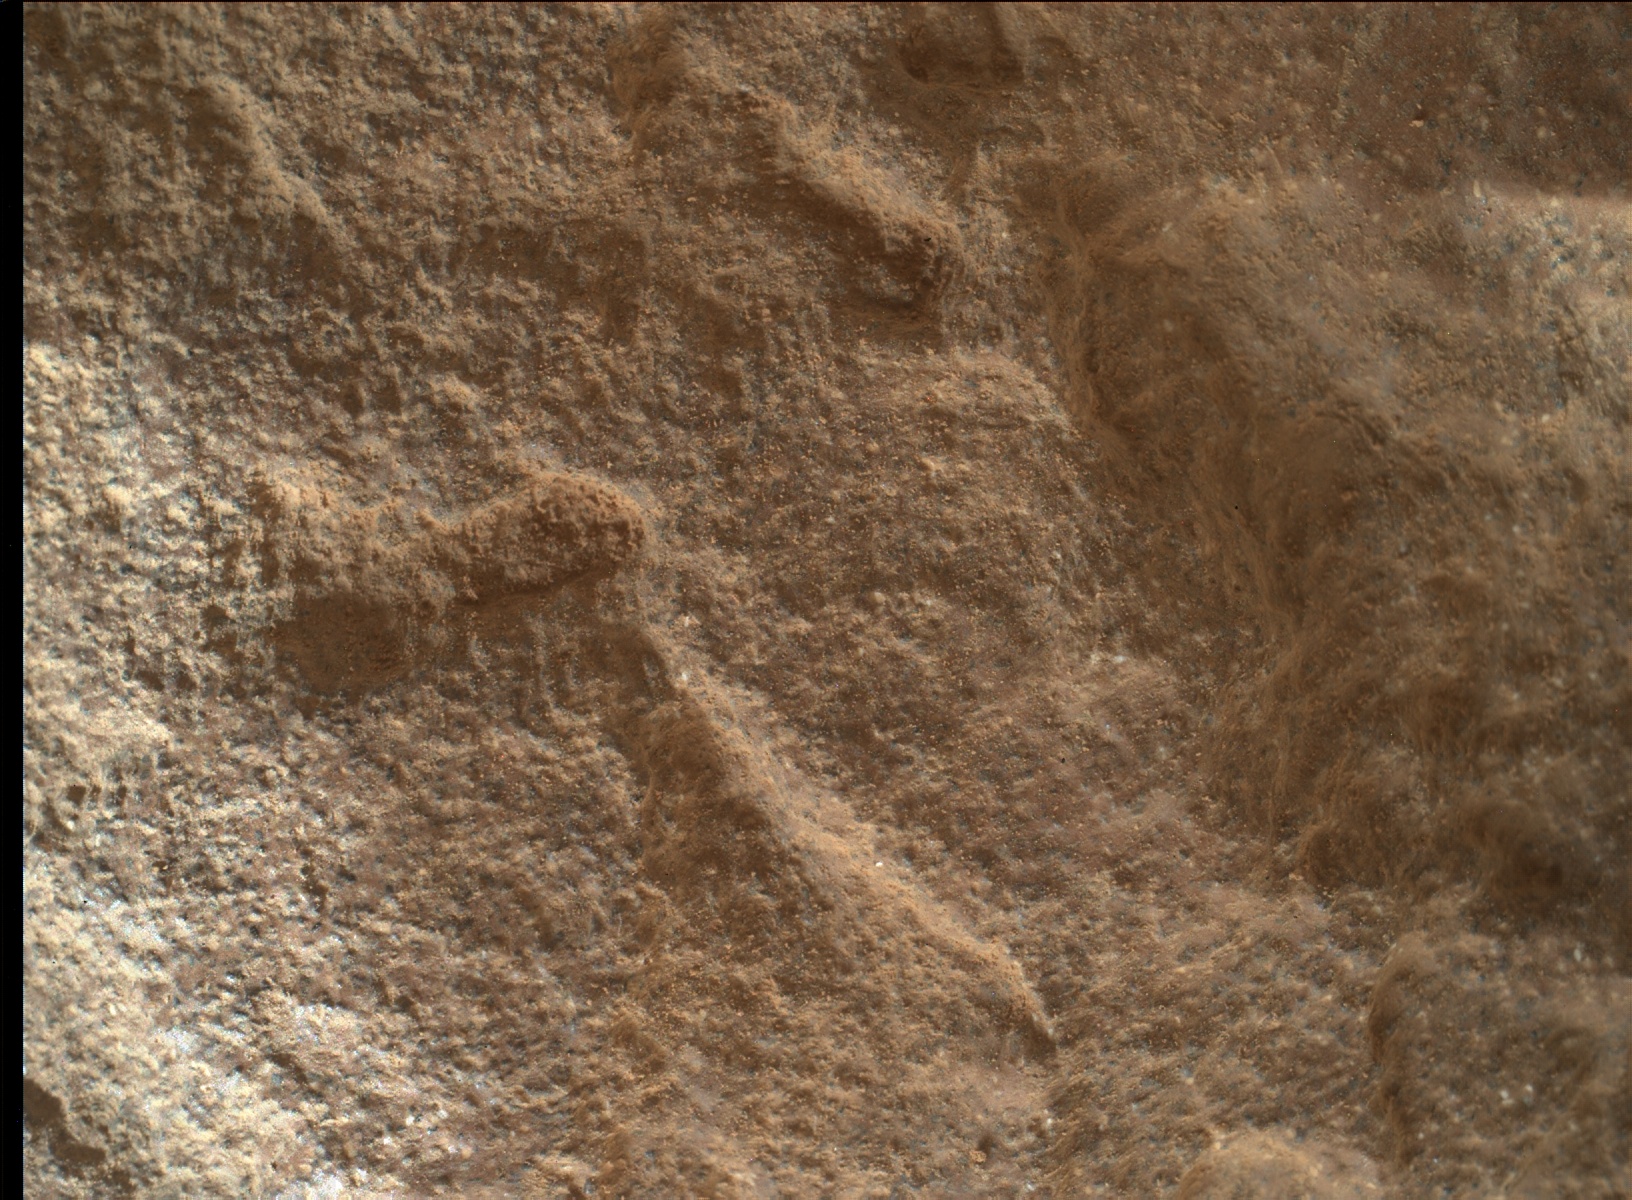 Nasa's Mars rover Curiosity acquired this image using its Mars Hand Lens Imager (MAHLI) on Sol 1710